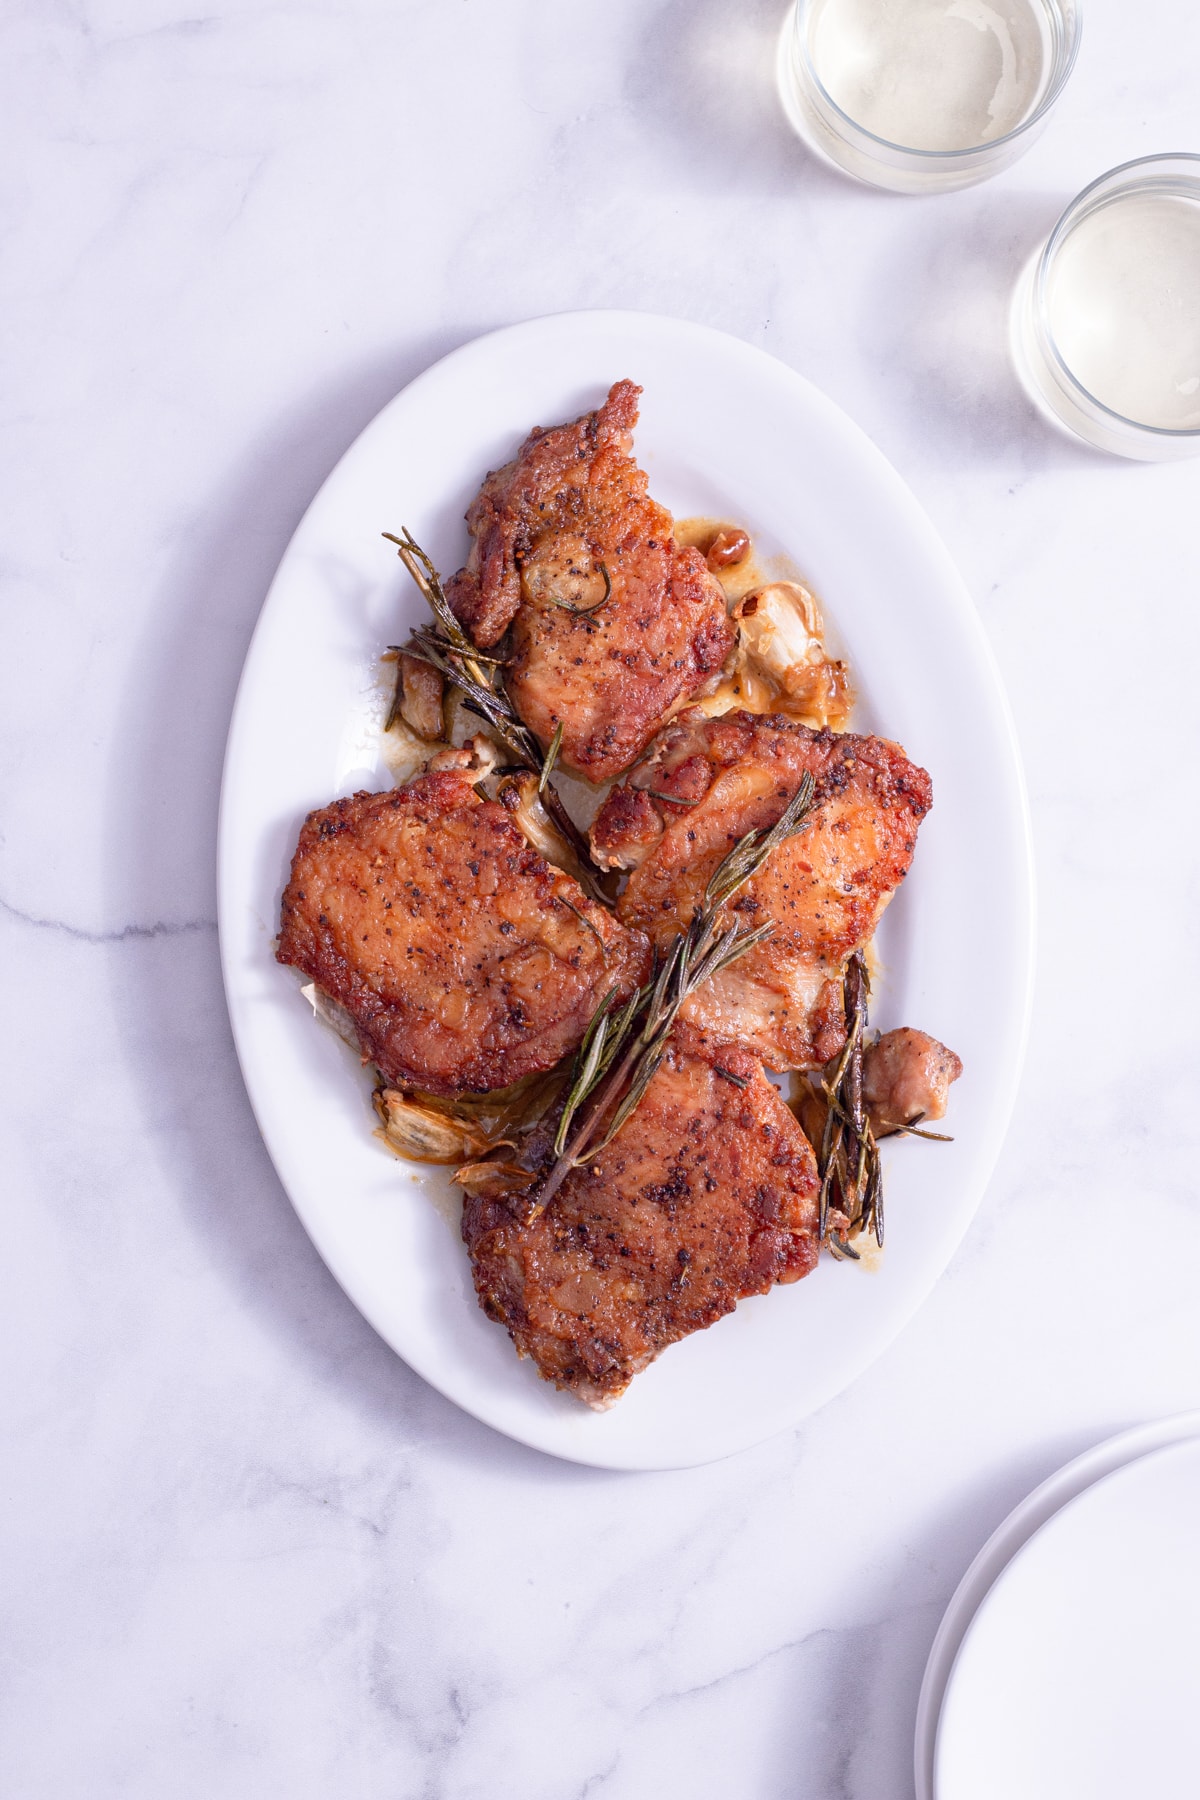 Overhead shot of a platter of Crispy Chicken Thighs with Rosemary and Garlic surrounded by glasses of wine and white plates on a marble surface.